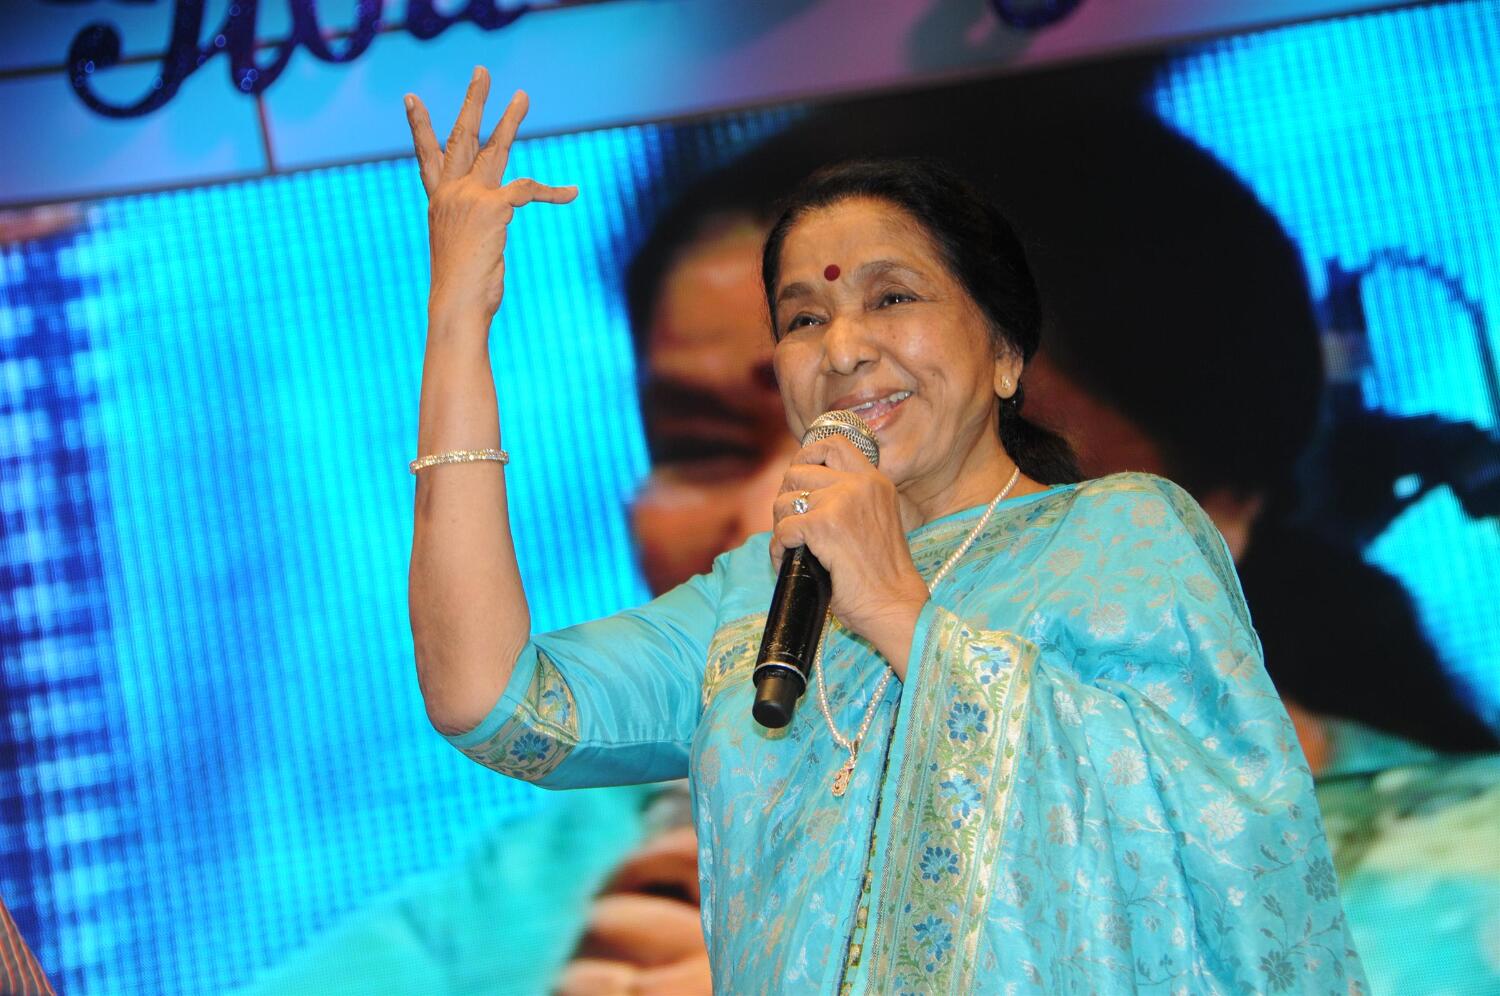 Veteran Singer Asha Bhosle At Her 80th Birthday Celebrations With First Look Launch Of Her Film